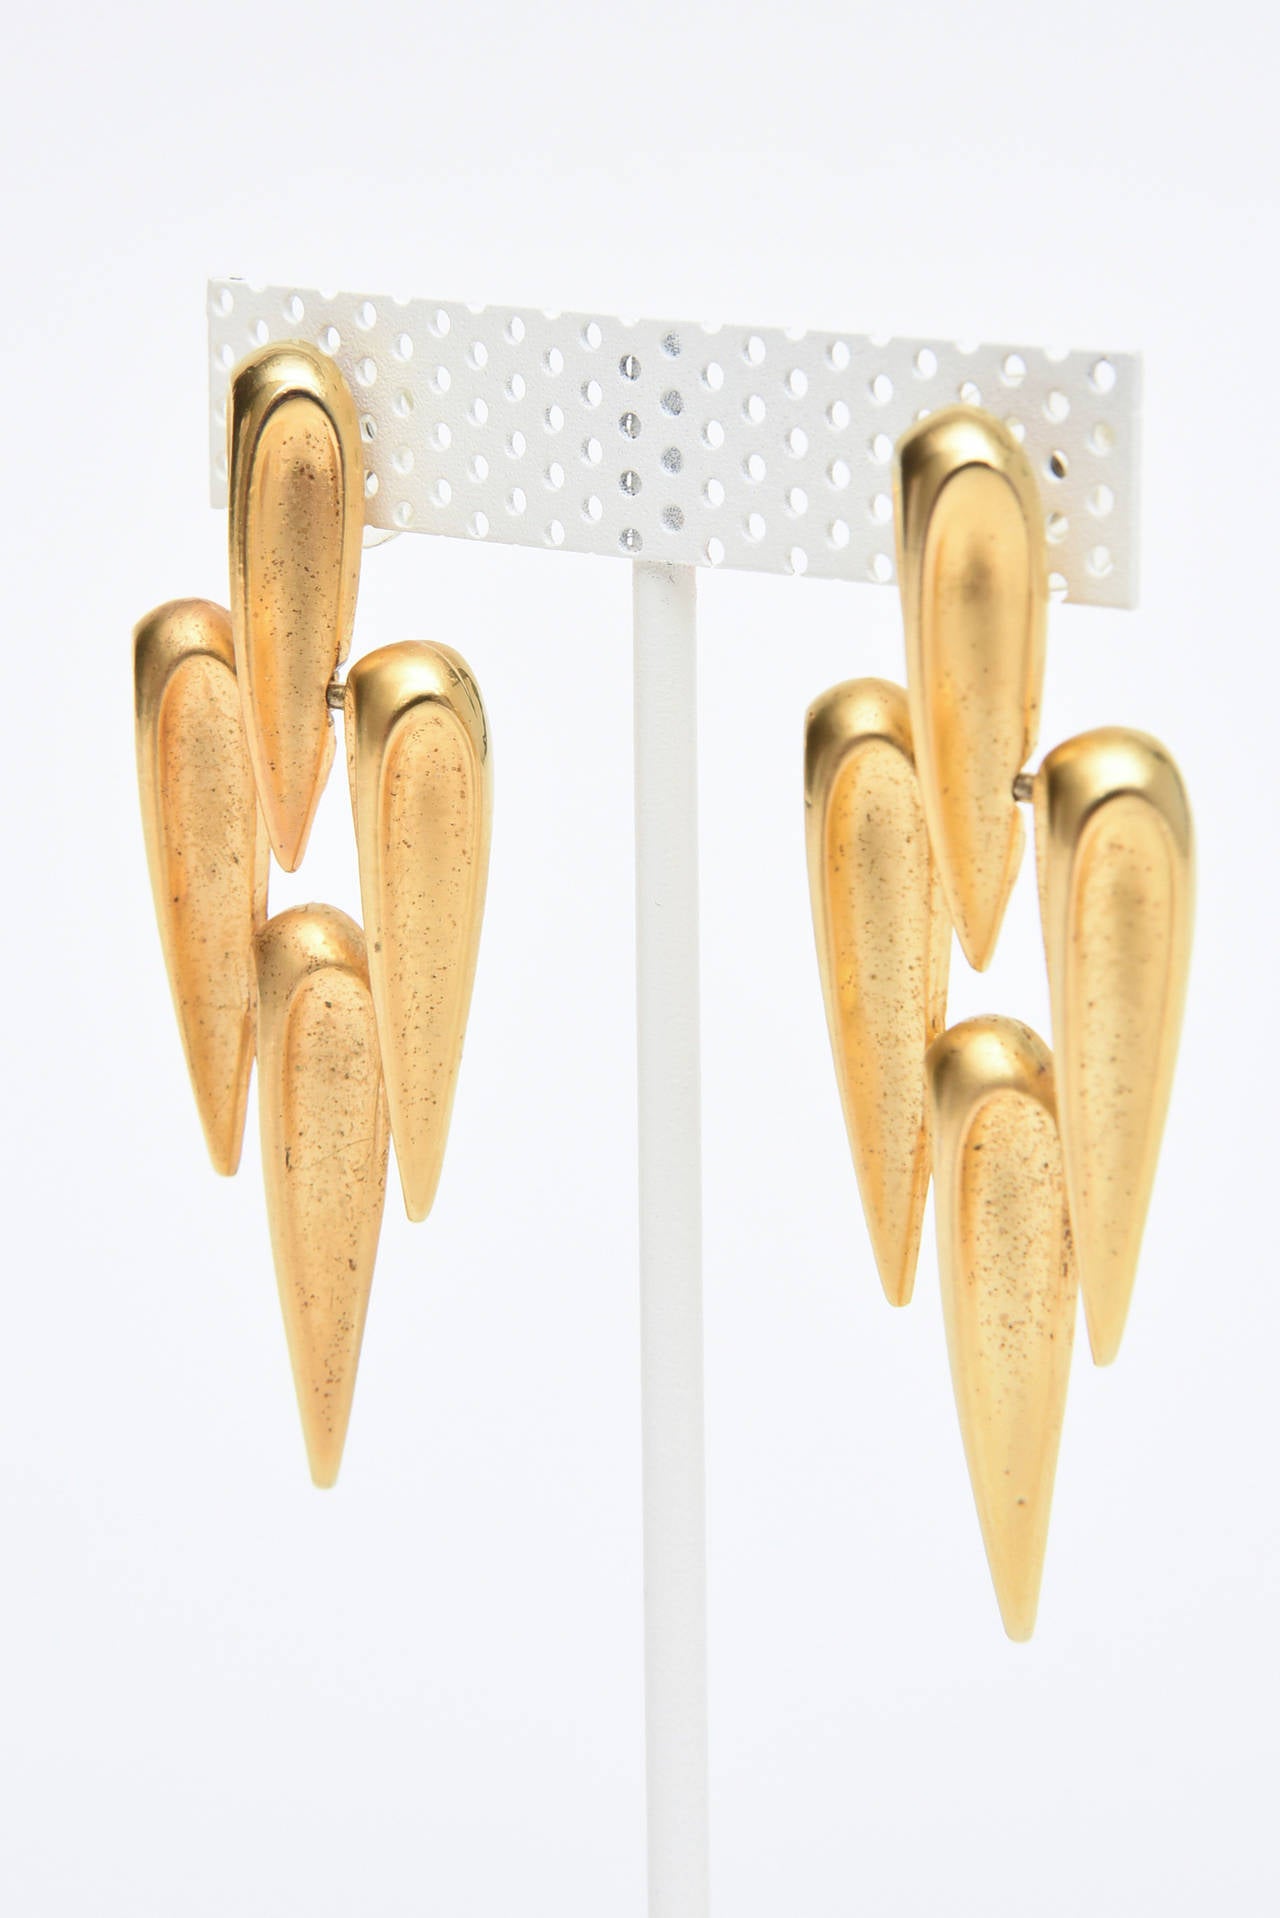 Four teardrops form a sculptural design in these gold plated pierced earrings that are so modern and timeless. 
These are of the contemporary look and design. These could go day or evening.
They are by Park Lane.